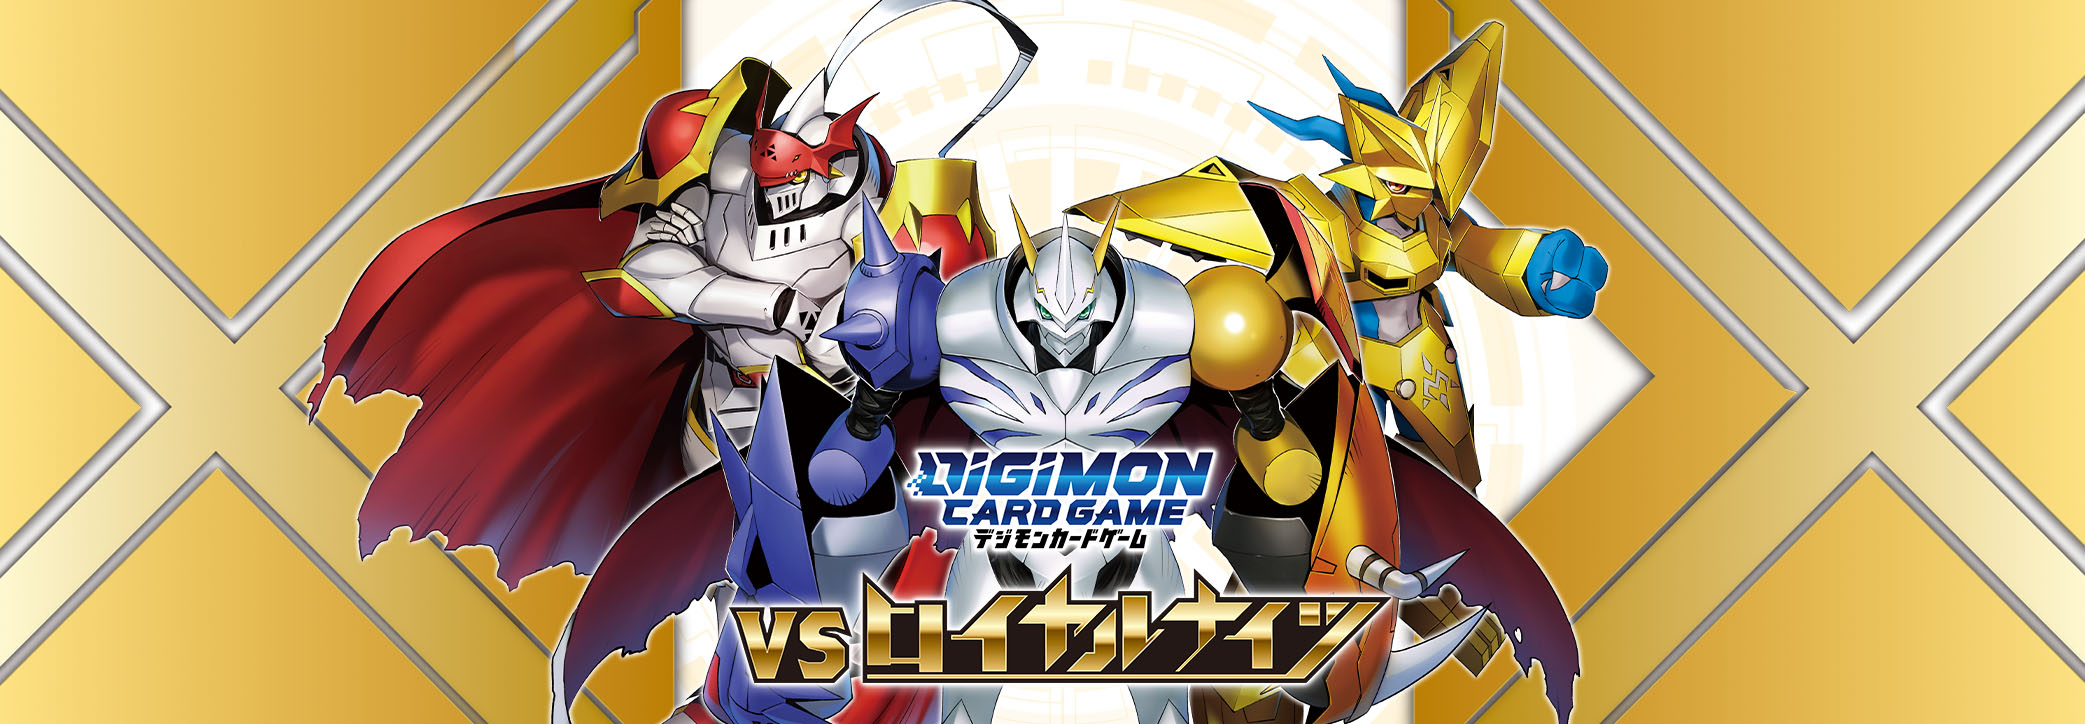 DIGIMON CARD GAME BT-13 BOOSTER VS ROYAL KNIGHTS cards list